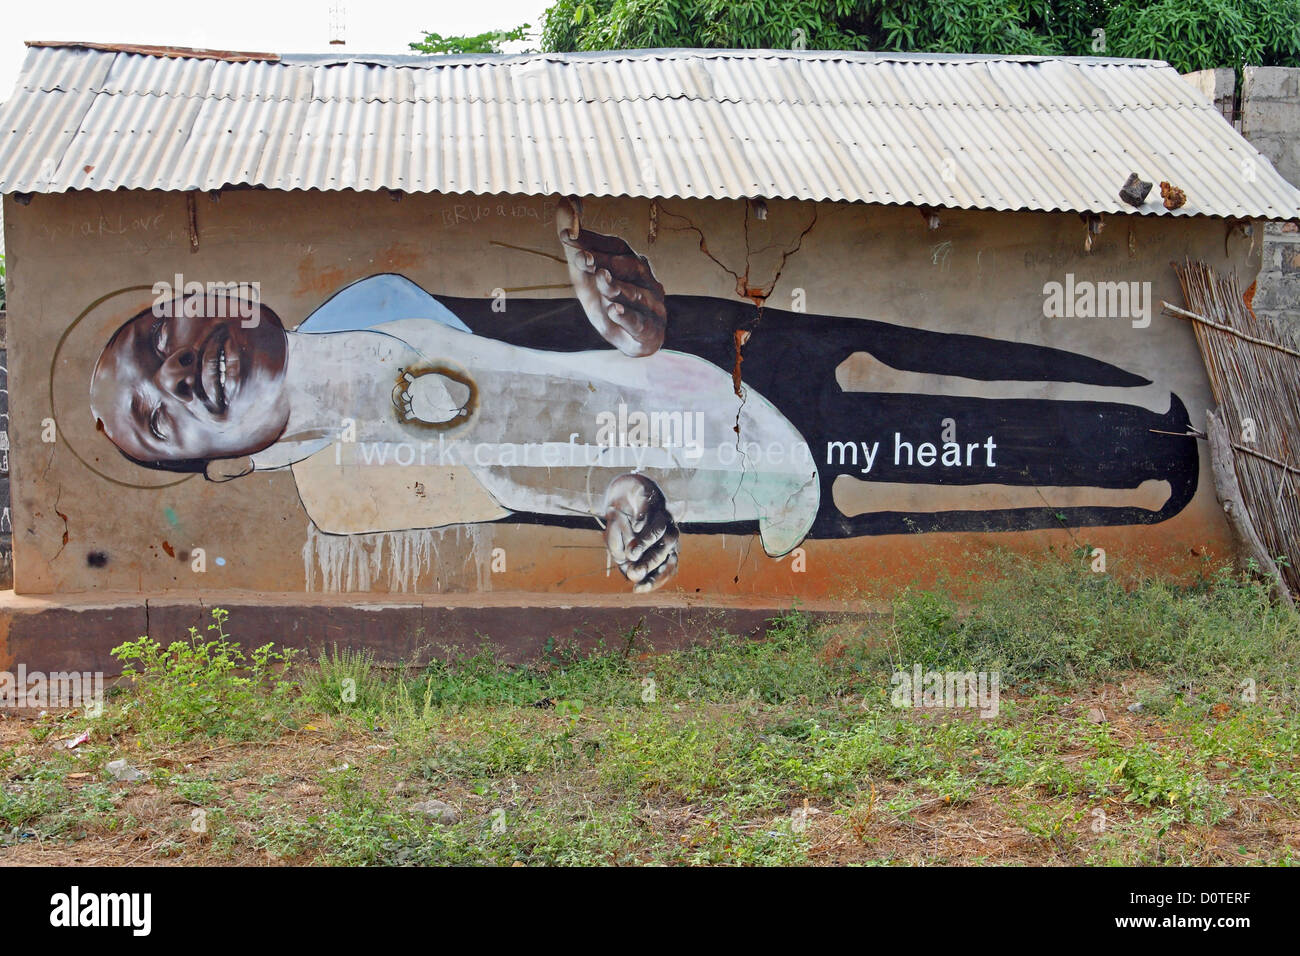 Mural from the Wide Open Walls art village project, Kubuneh, near Brikama, The Gambia Stock Photo